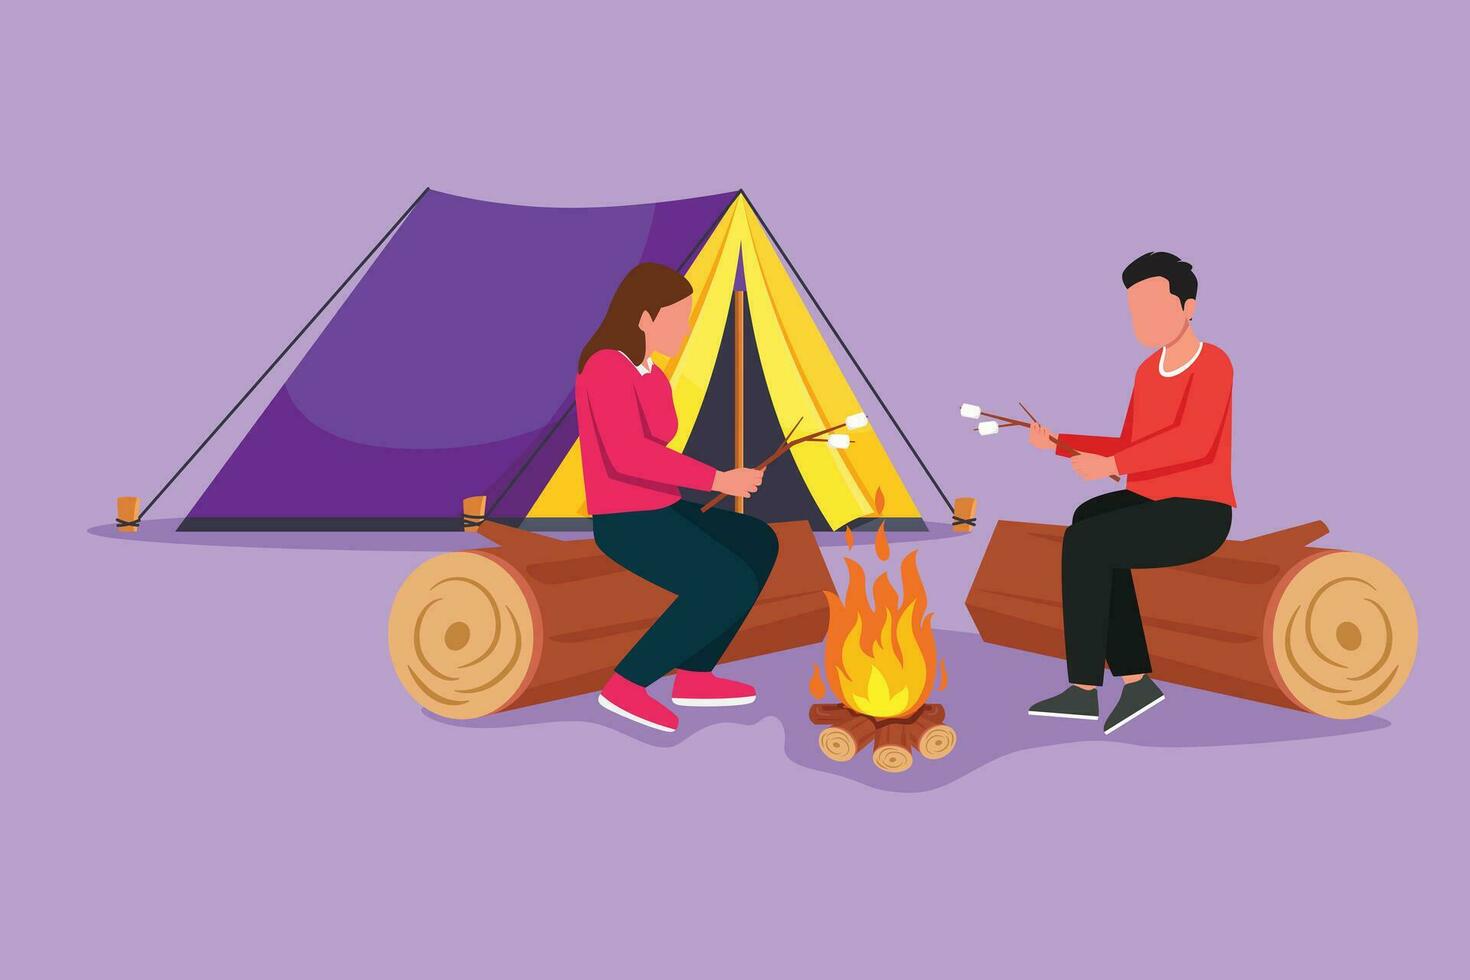 Character flat drawing happy romantic couple summer camp. Man and woman sitting by fireplace on log. Bonfire with marshmallow. Outdoor vacation in forest logo icon. Cartoon design vector illustration